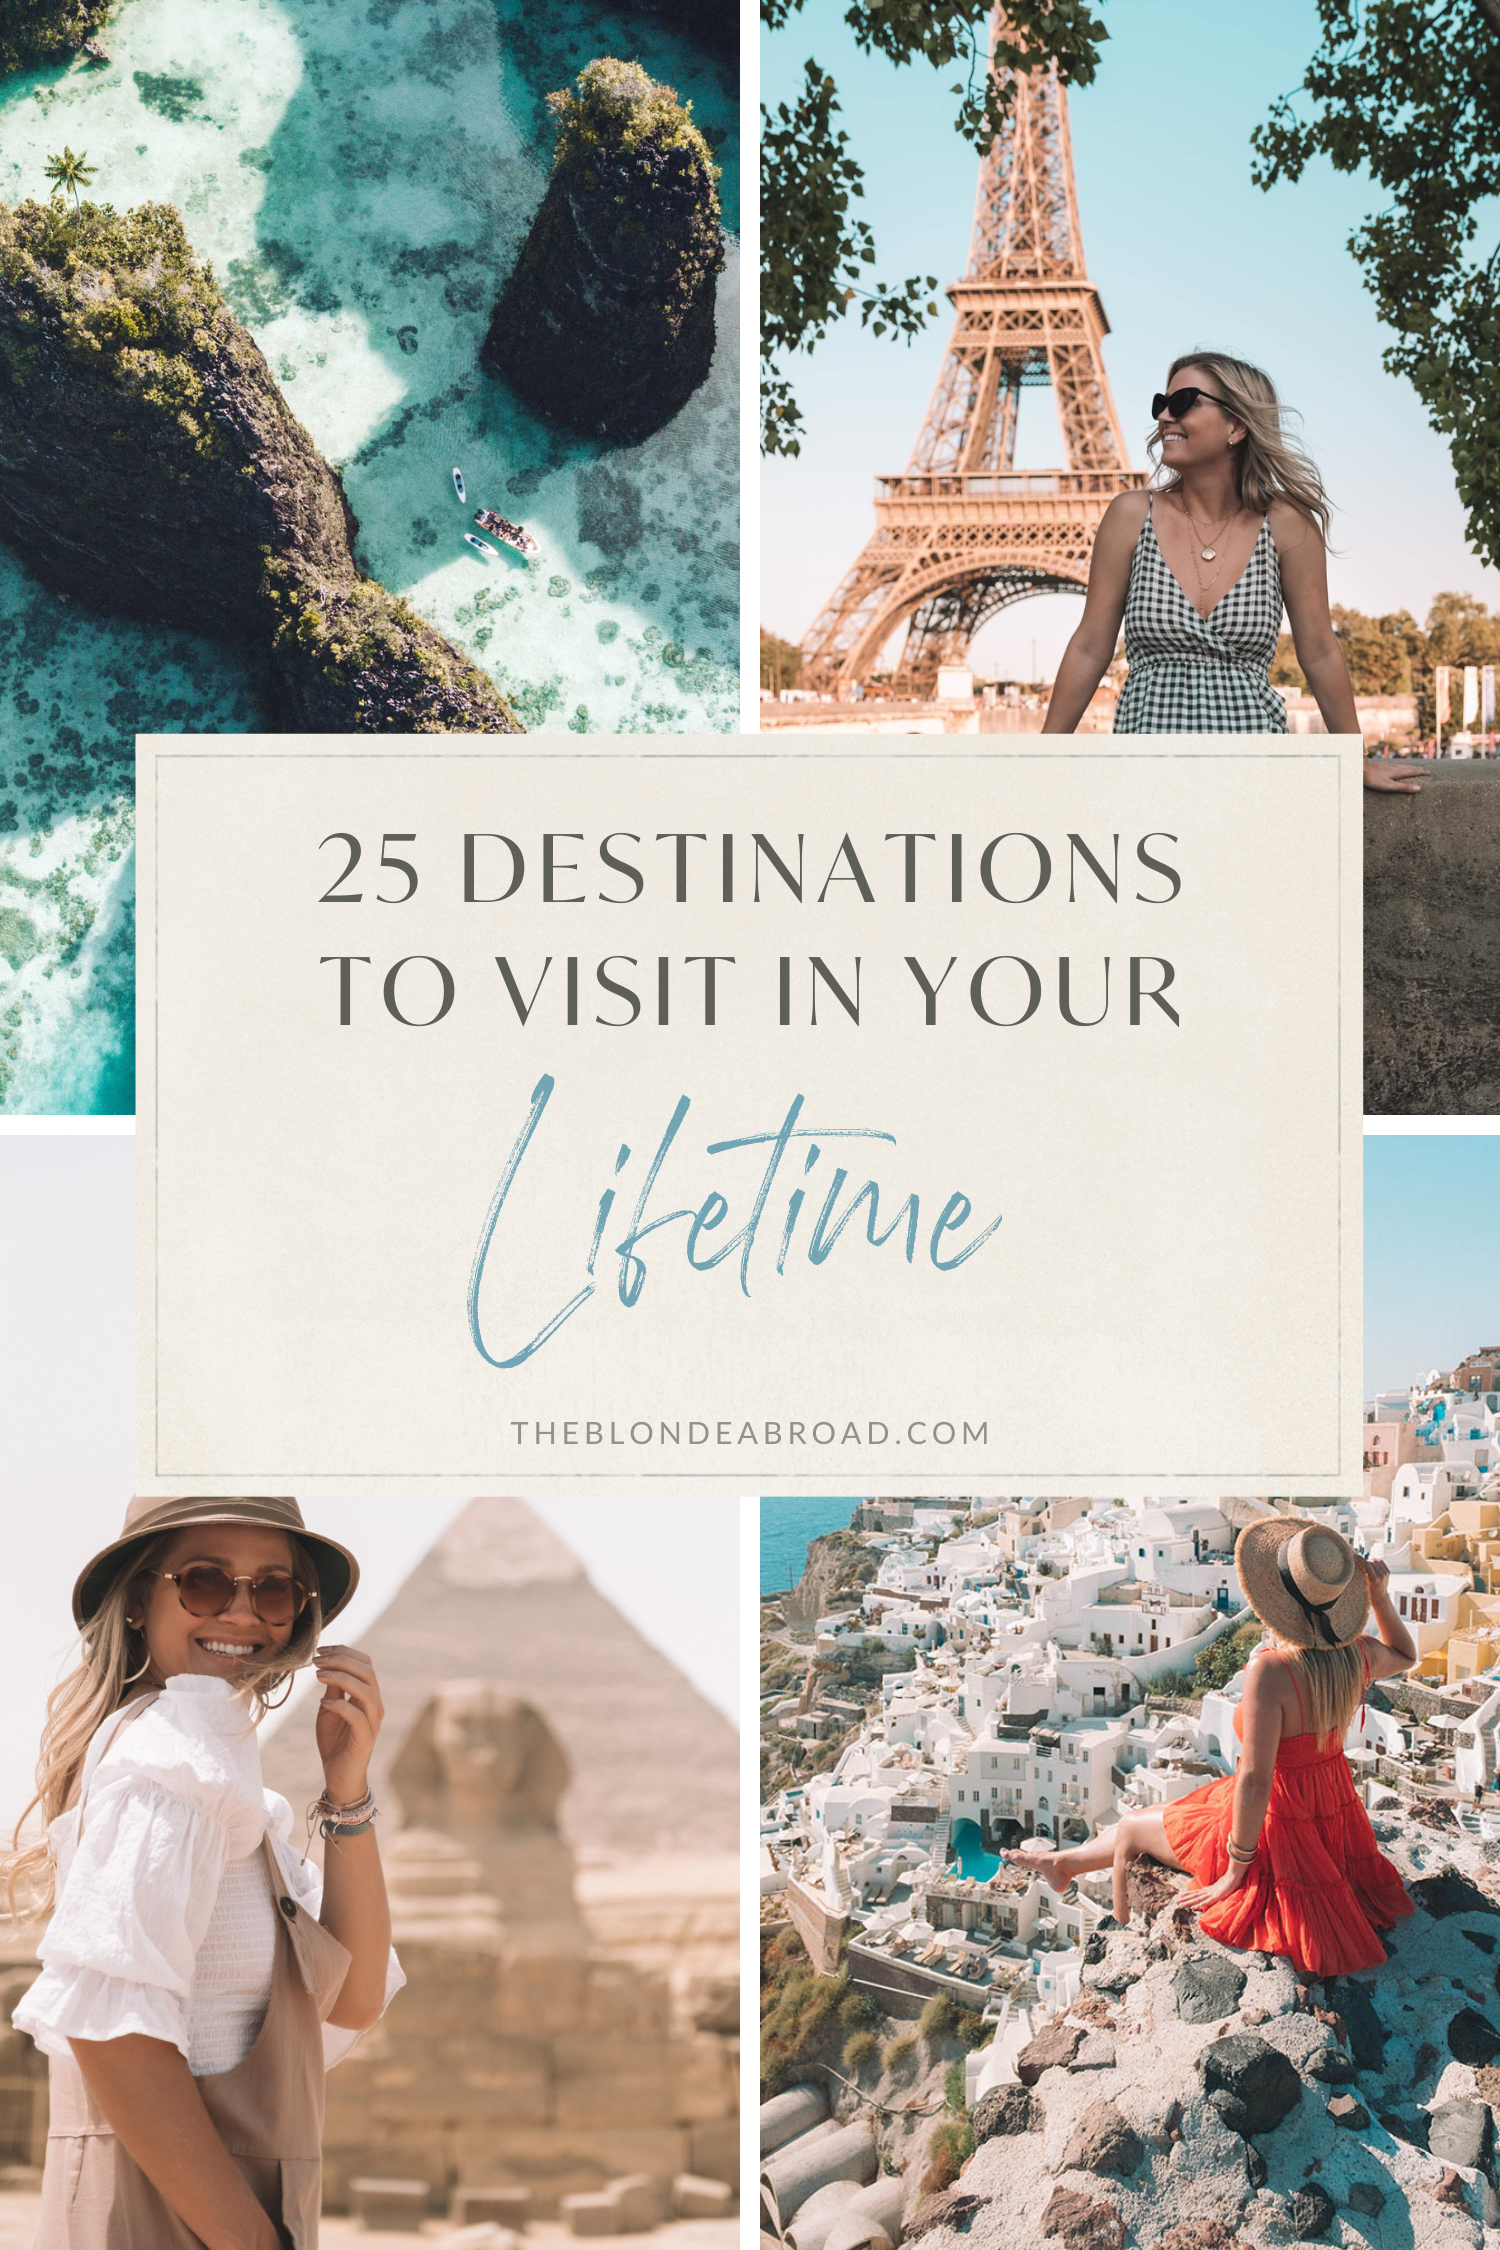 25 Destinations to Visit in Your Lifetime